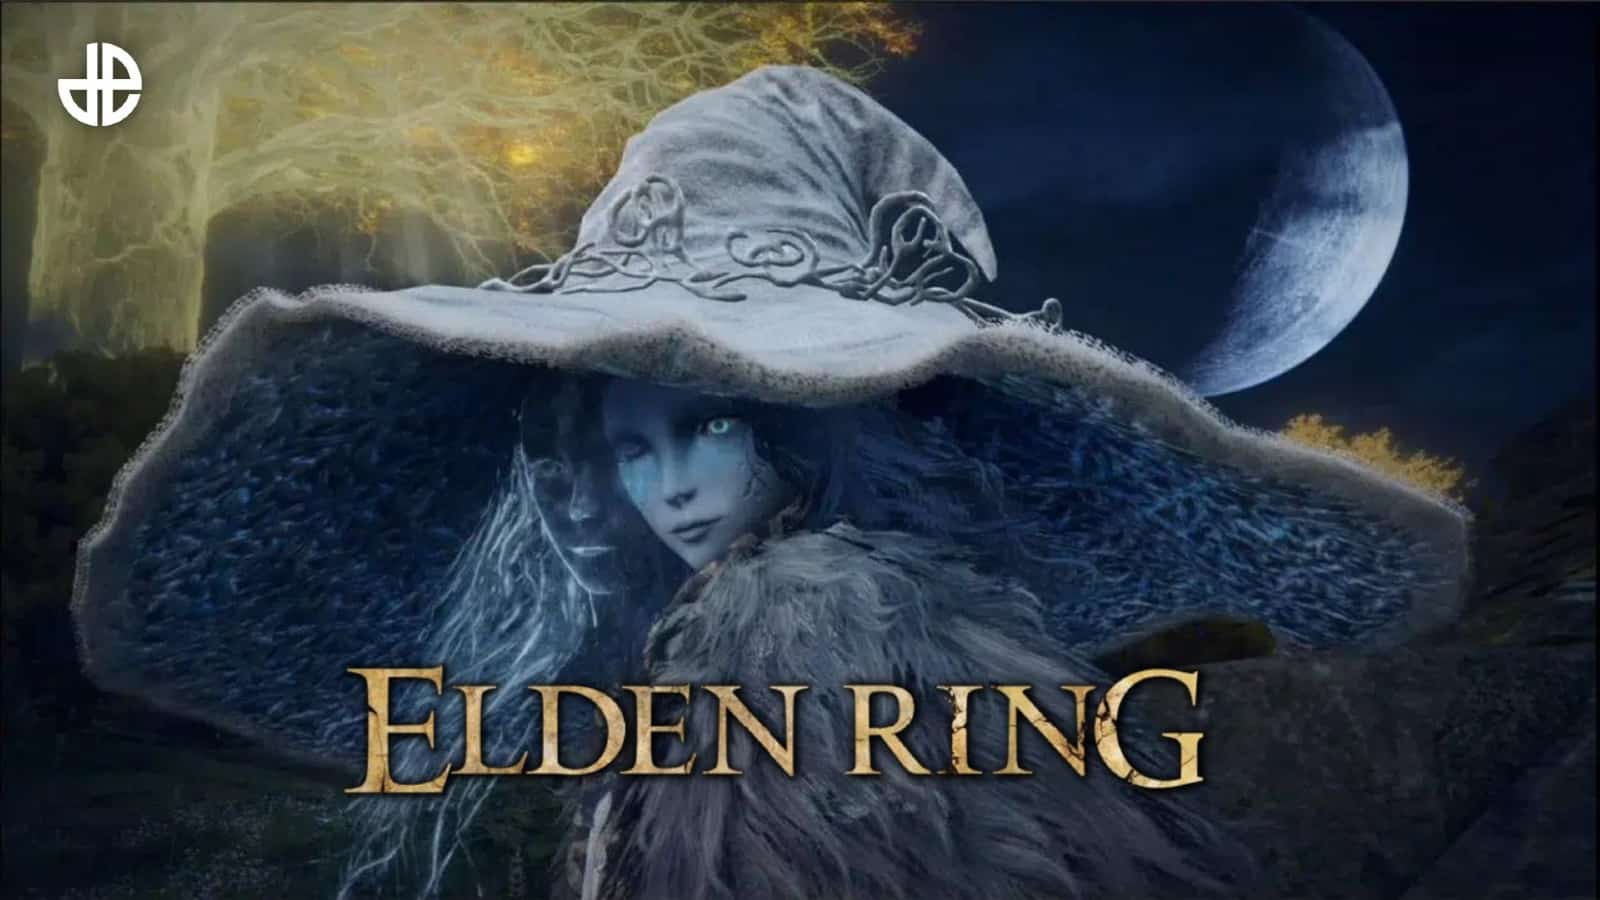 Elden Ring Ranni Quest: How to find the Baleful Shadow in Nokstella and use  the Dark Moon Ring